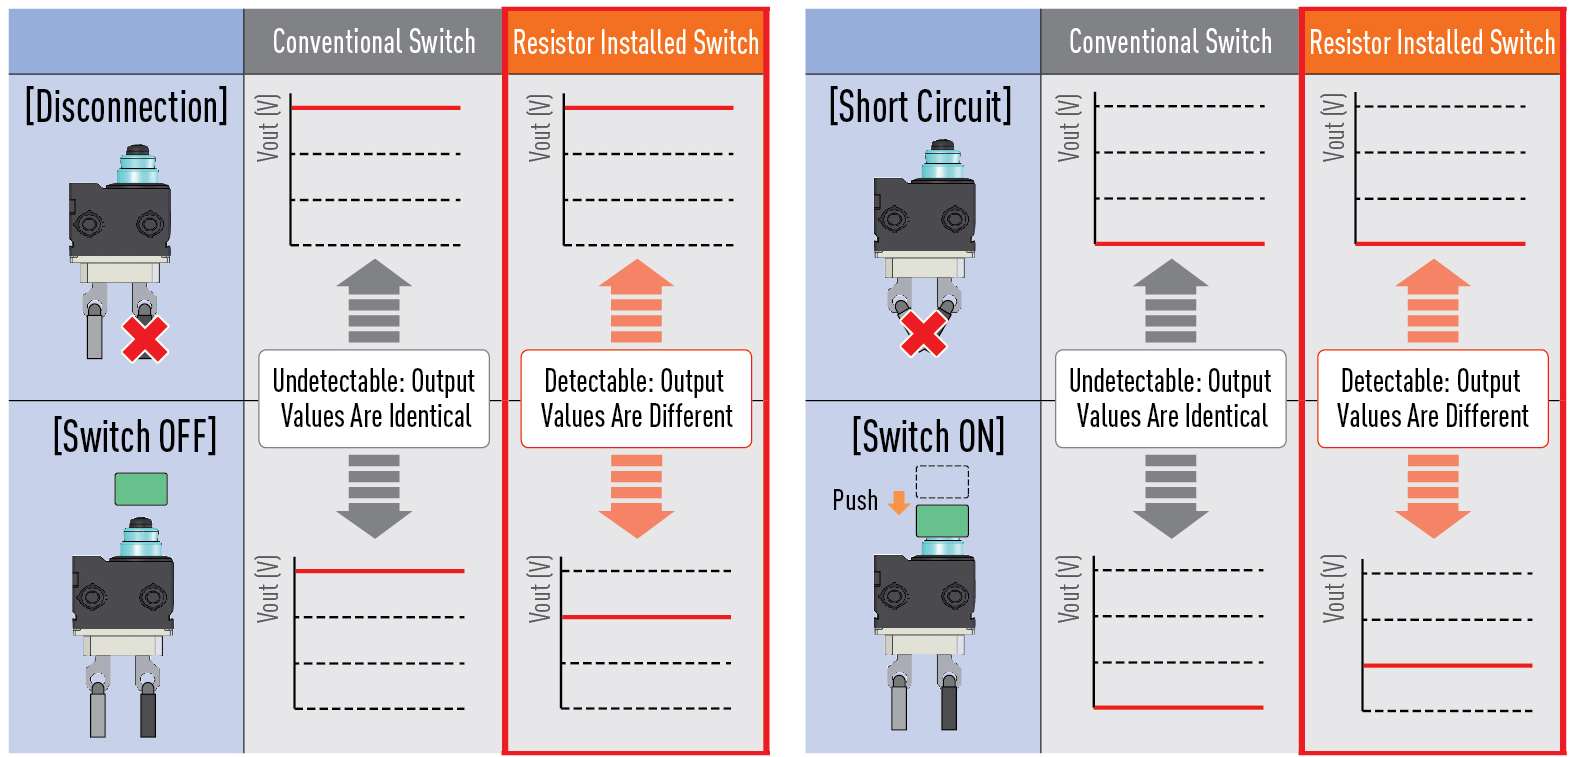 Differences Between Conventional Switches